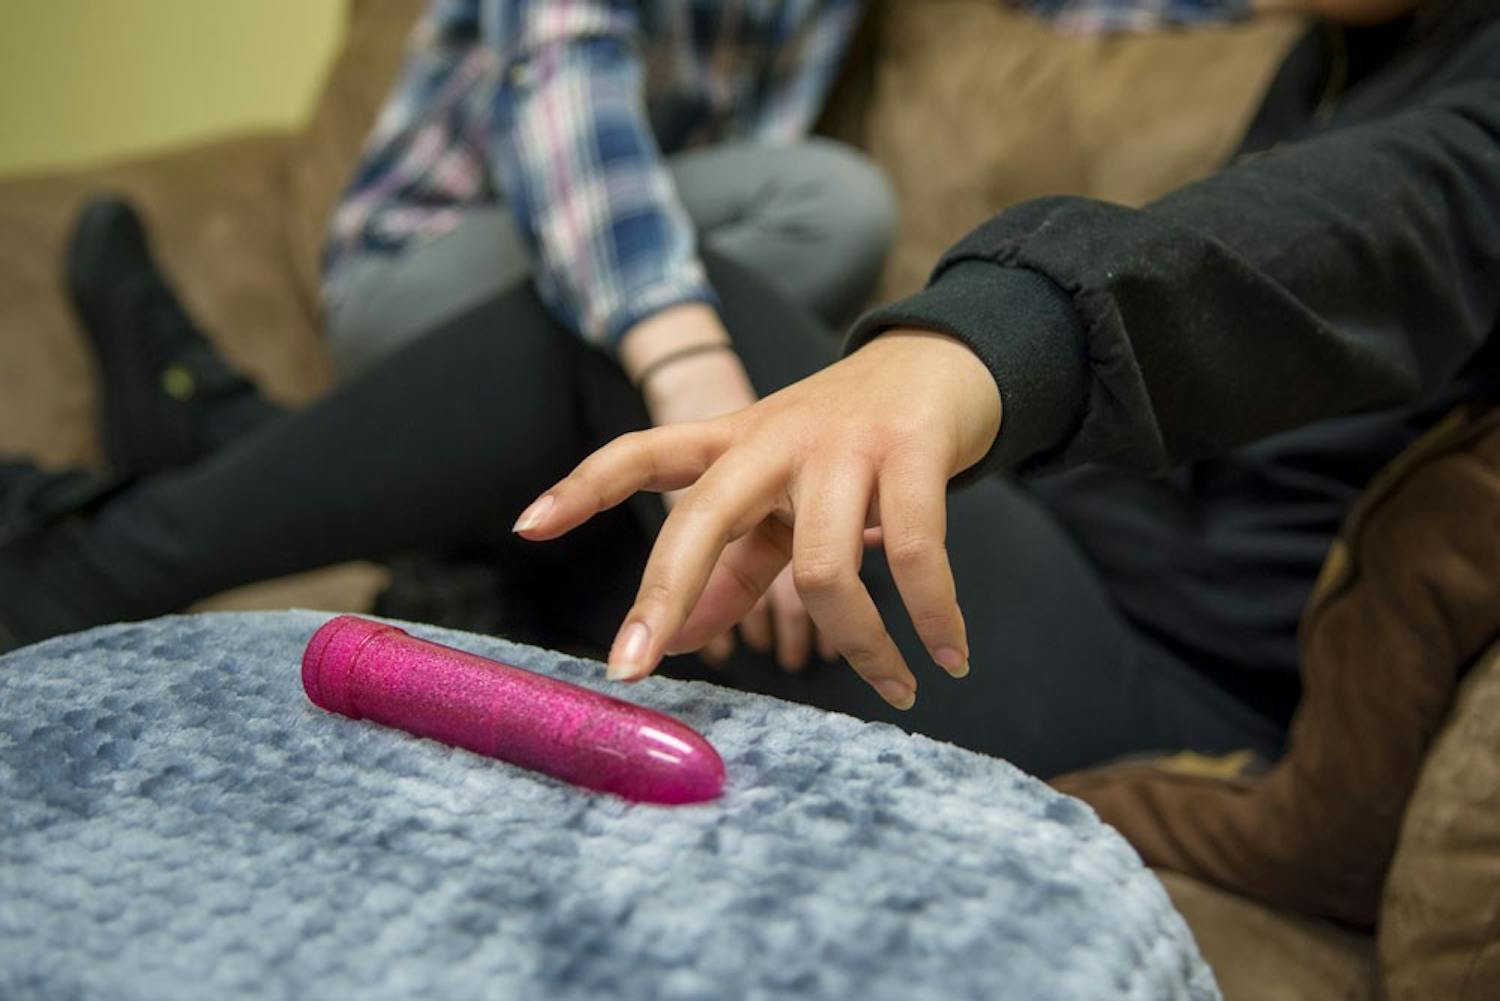 Sex toys can help spice up one's sex life. Forty-six percent of UB students said they have used a sex toy before.